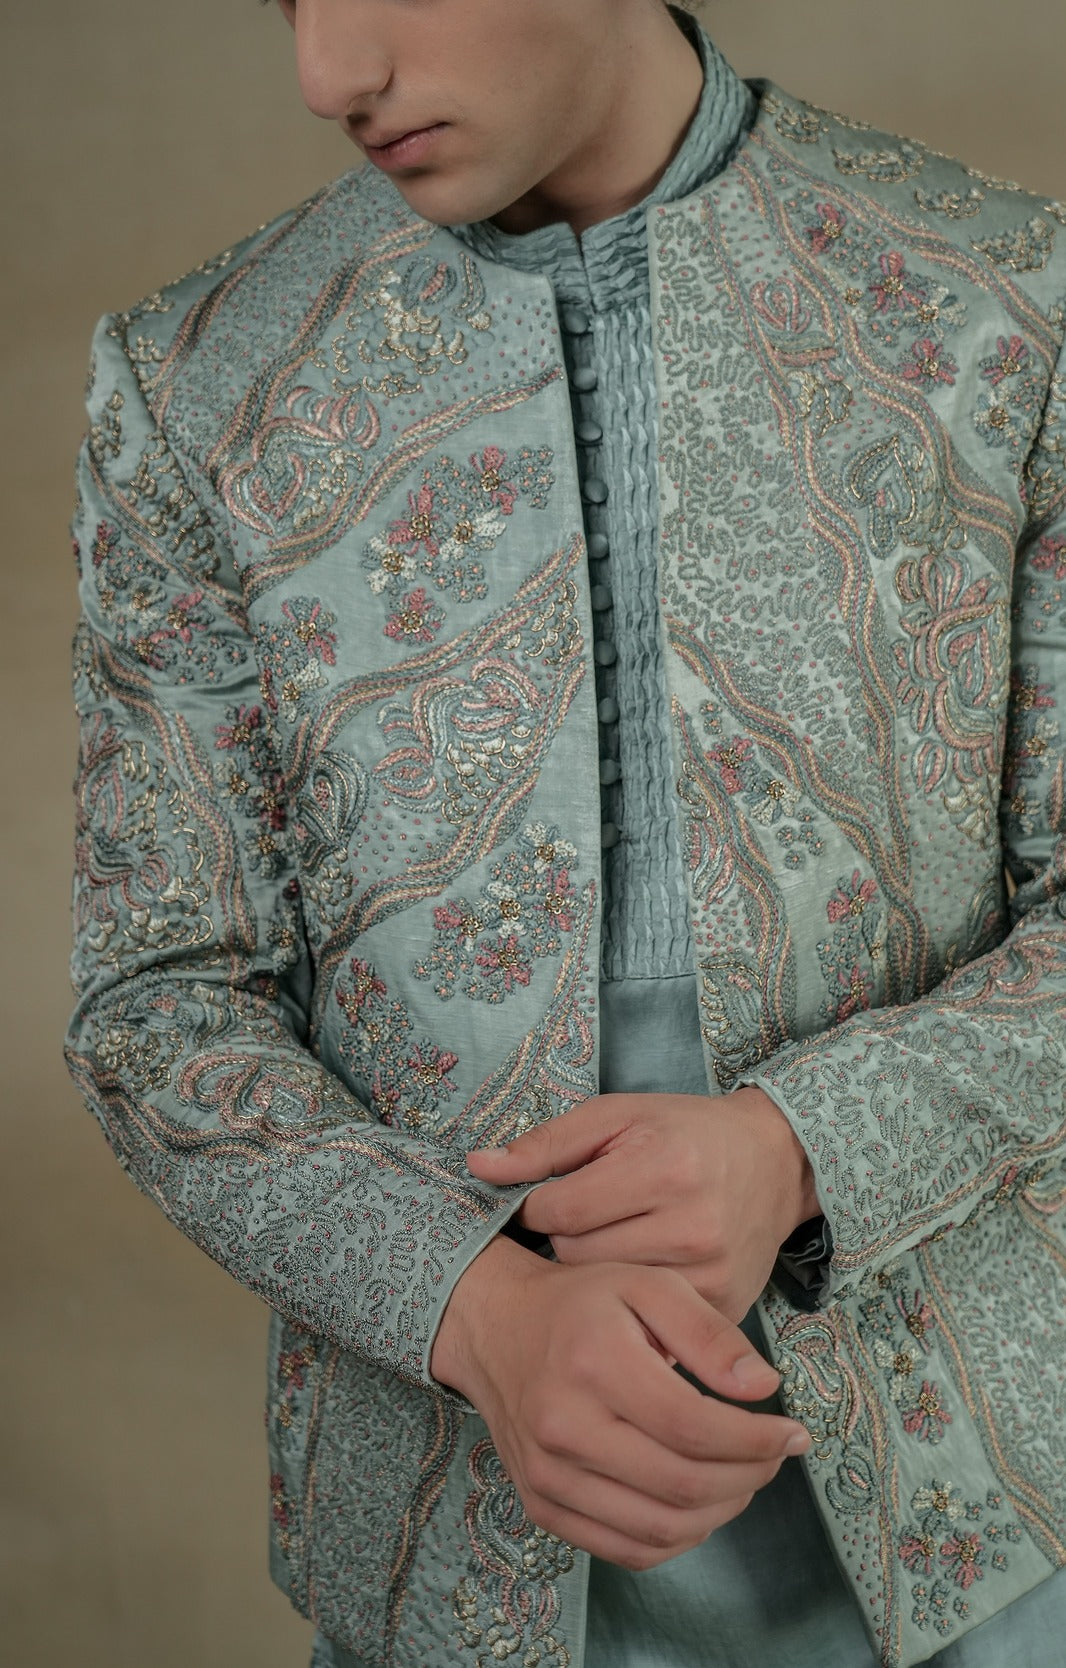 Introducing our exquisite chateau grey hand-embroidered short jacket set, a true work of art.